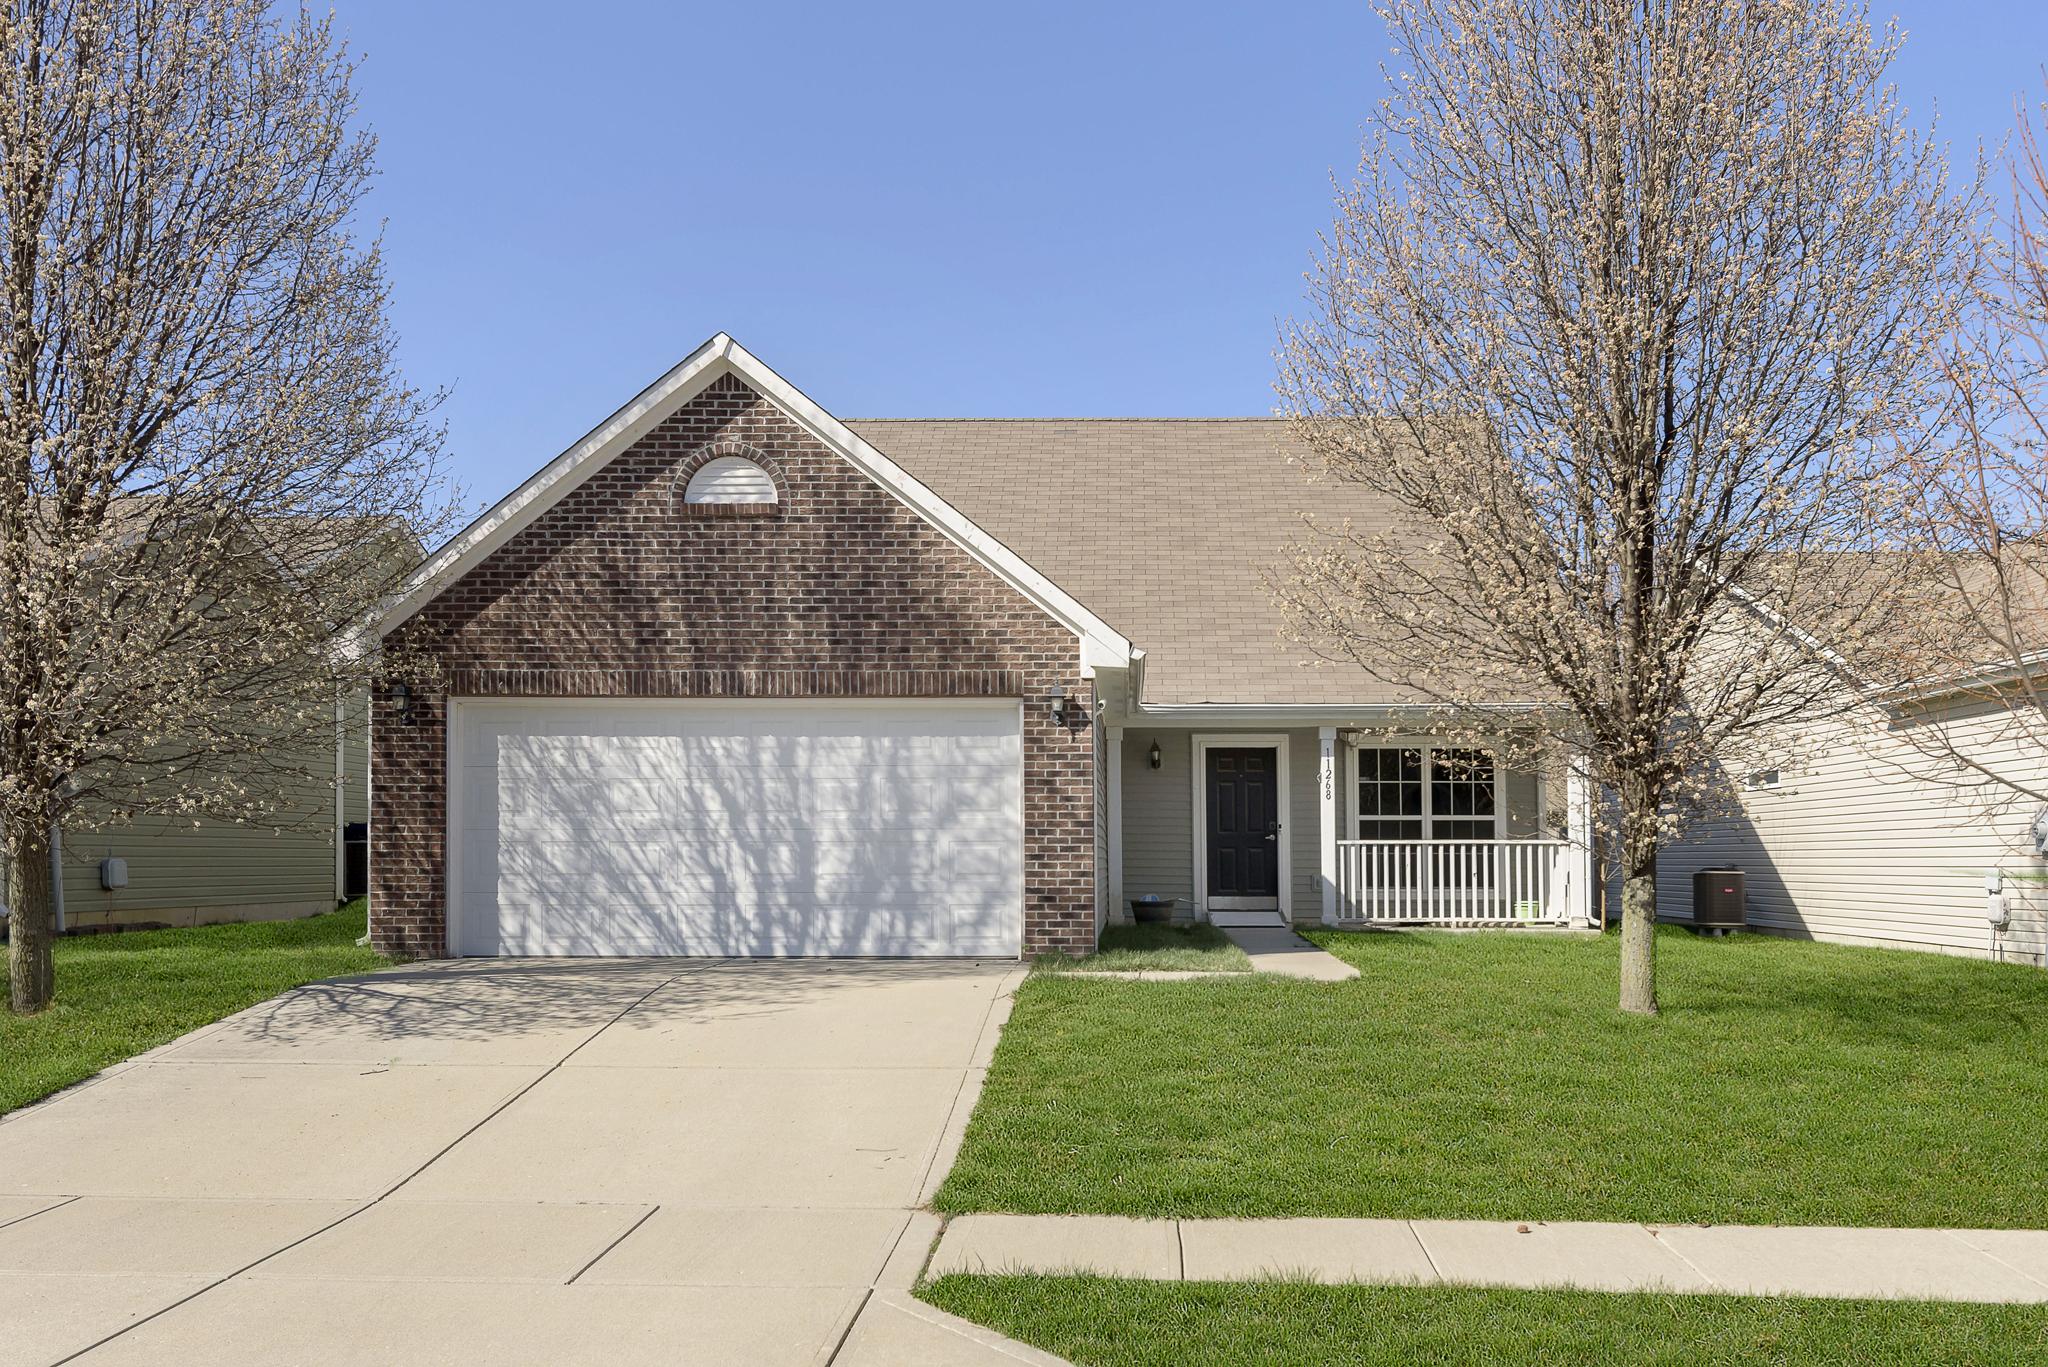 Photo one of 11268 Funny Cide Dr Noblesville IN 46060 | MLS 21972830